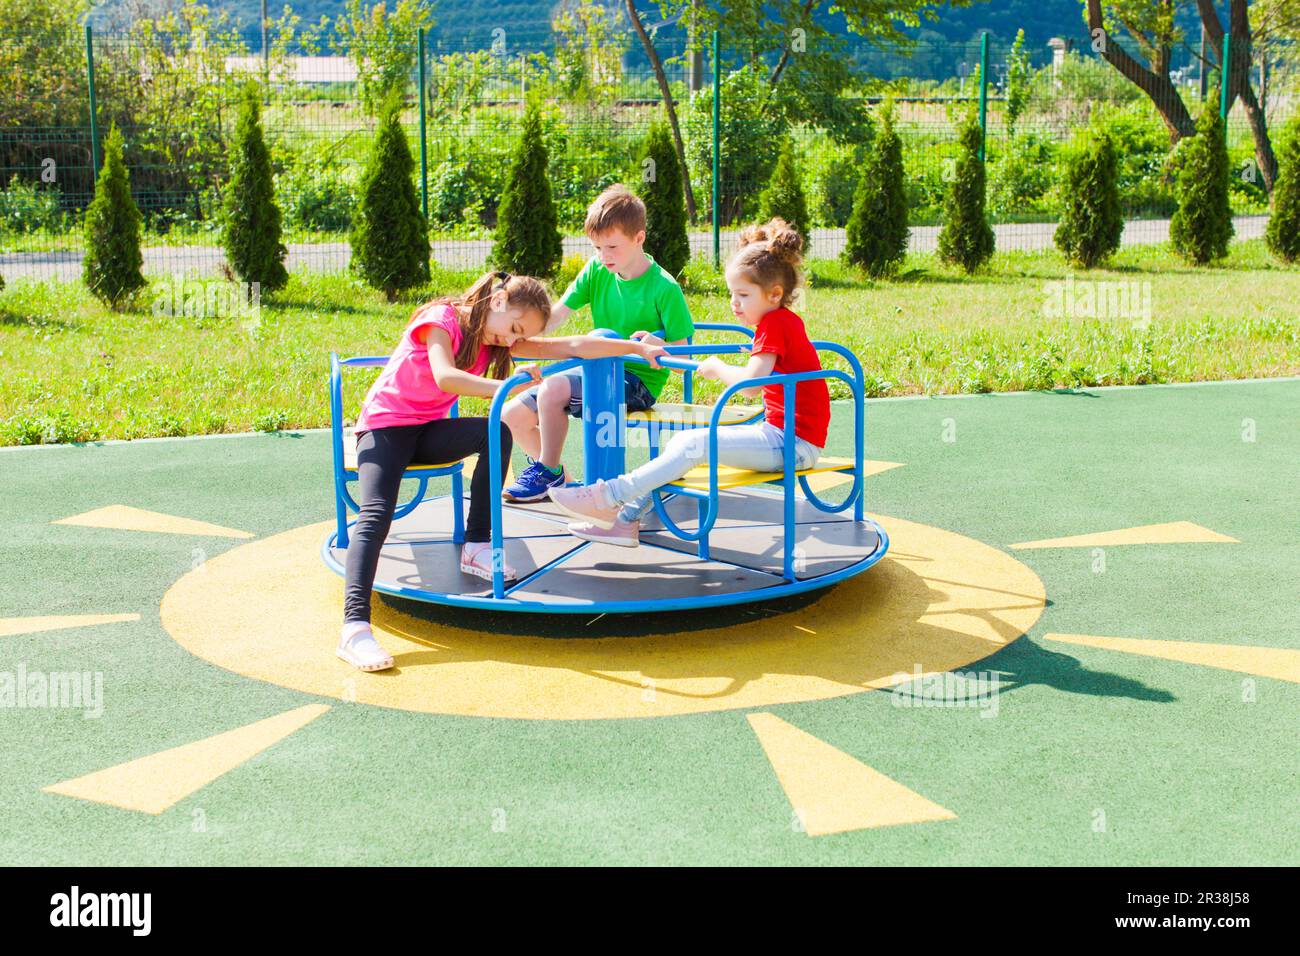 Calm pastime on the playground Stock Photo